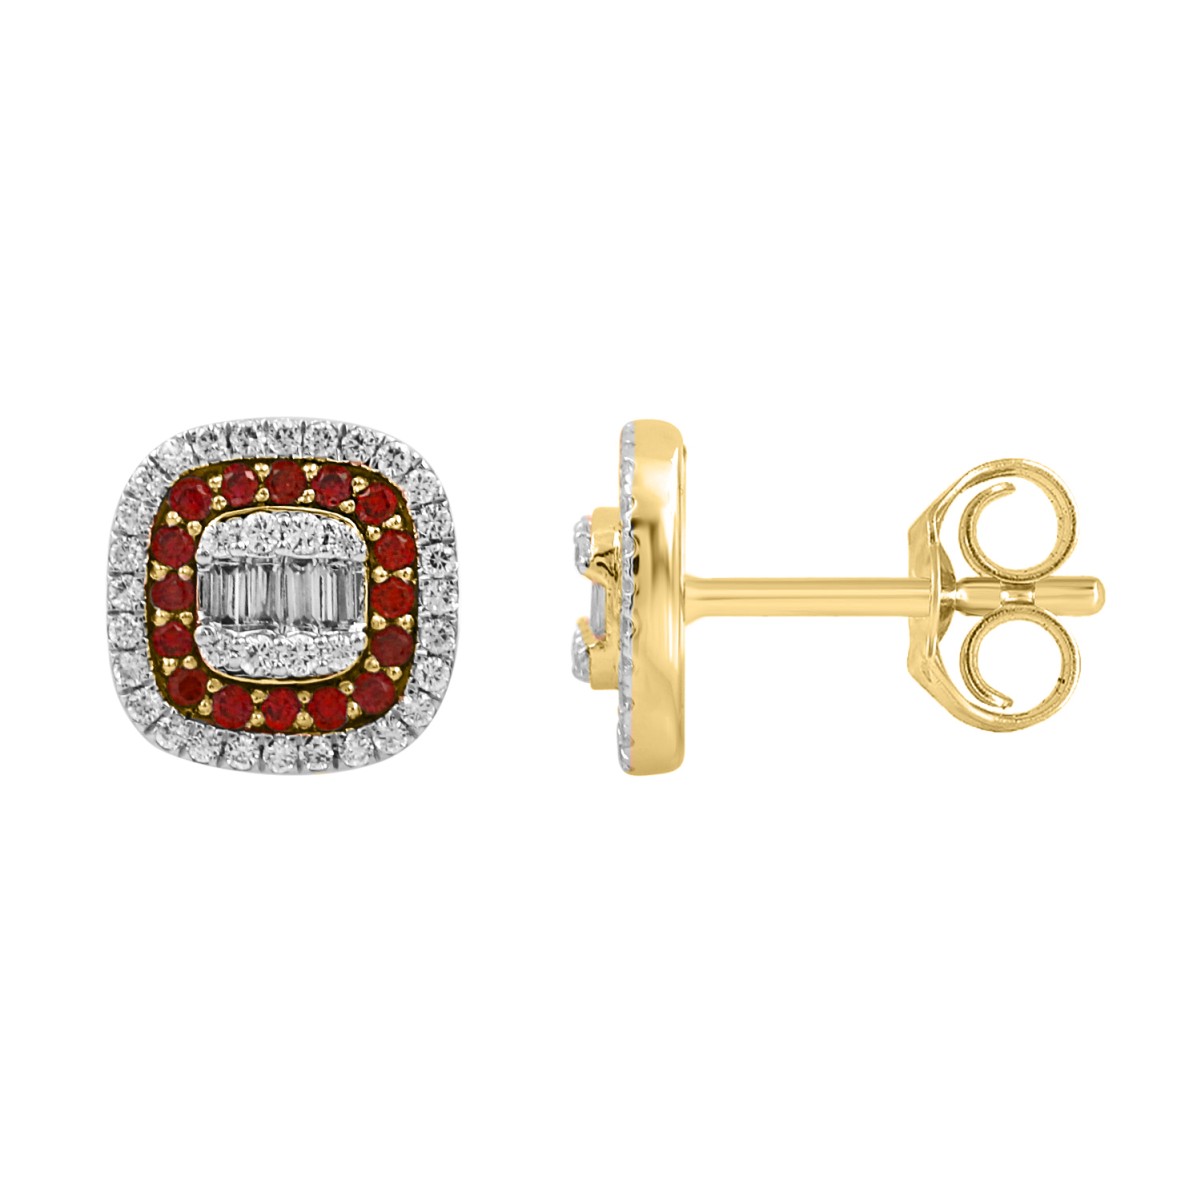 18K YELLOW GOLD 7/8CT ROUND/BAGUETTE DIAMOND LADIES EARRINGS(COLOR STONE BAGUETTE RUBY DIAMOND 1/2CT)